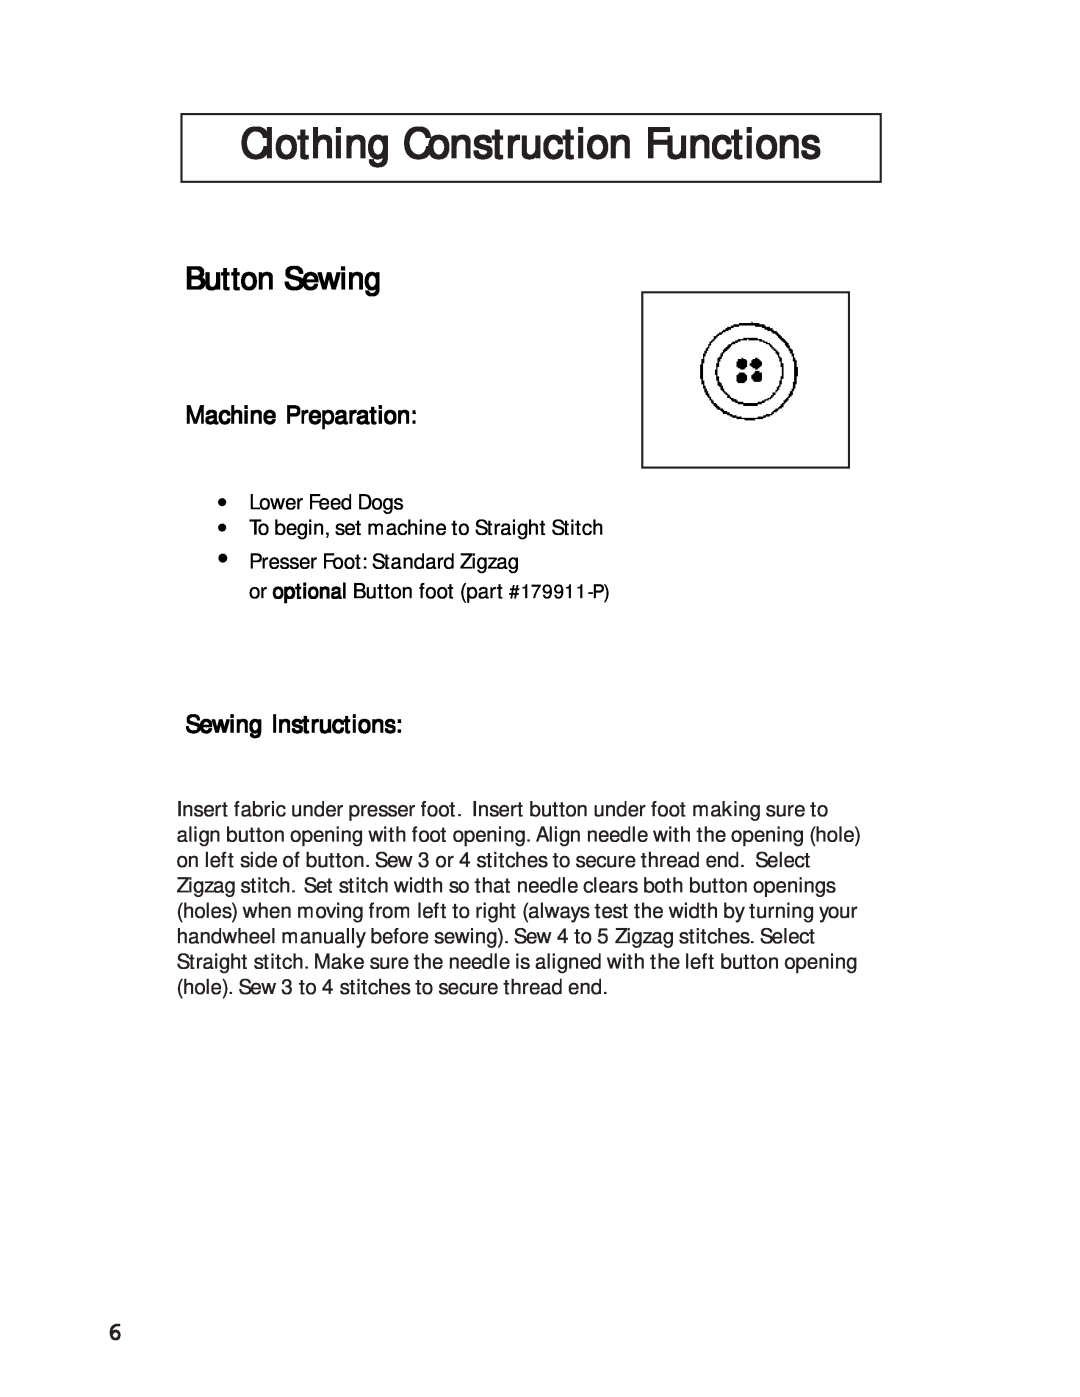 Singer 27 manual Clothing Construction Functions, Button Sewing, Machine Preparation, Sewing Instructions 